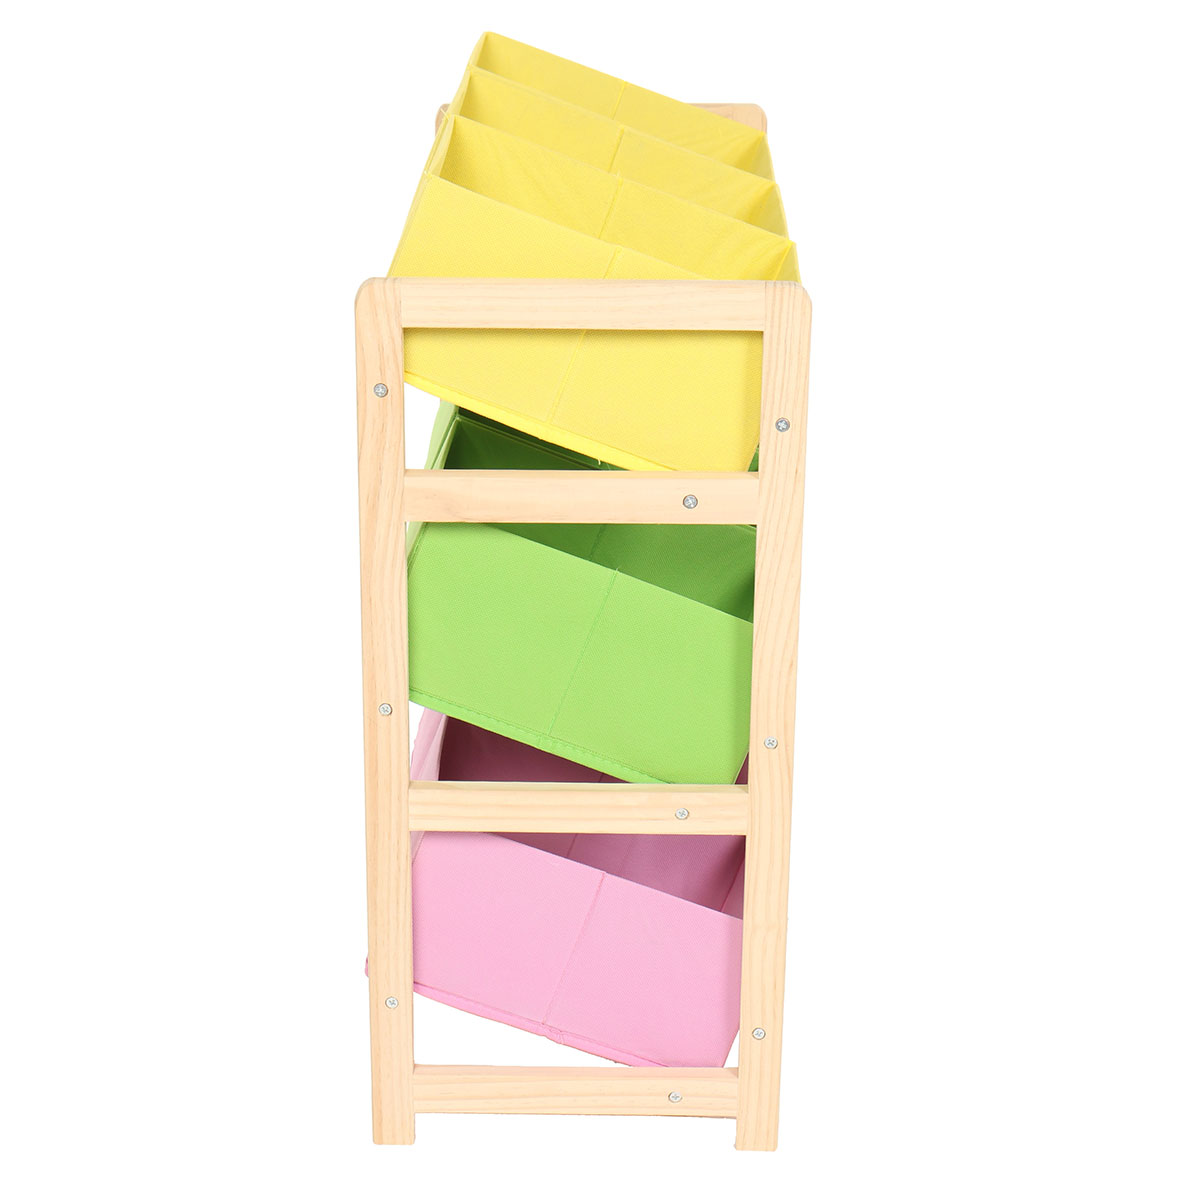 66309CM-Yellow-Pink-Green-Solid-Wood-Childrens-Toy-Rack-Storage-Rack-Toy-Rack-1754652-10